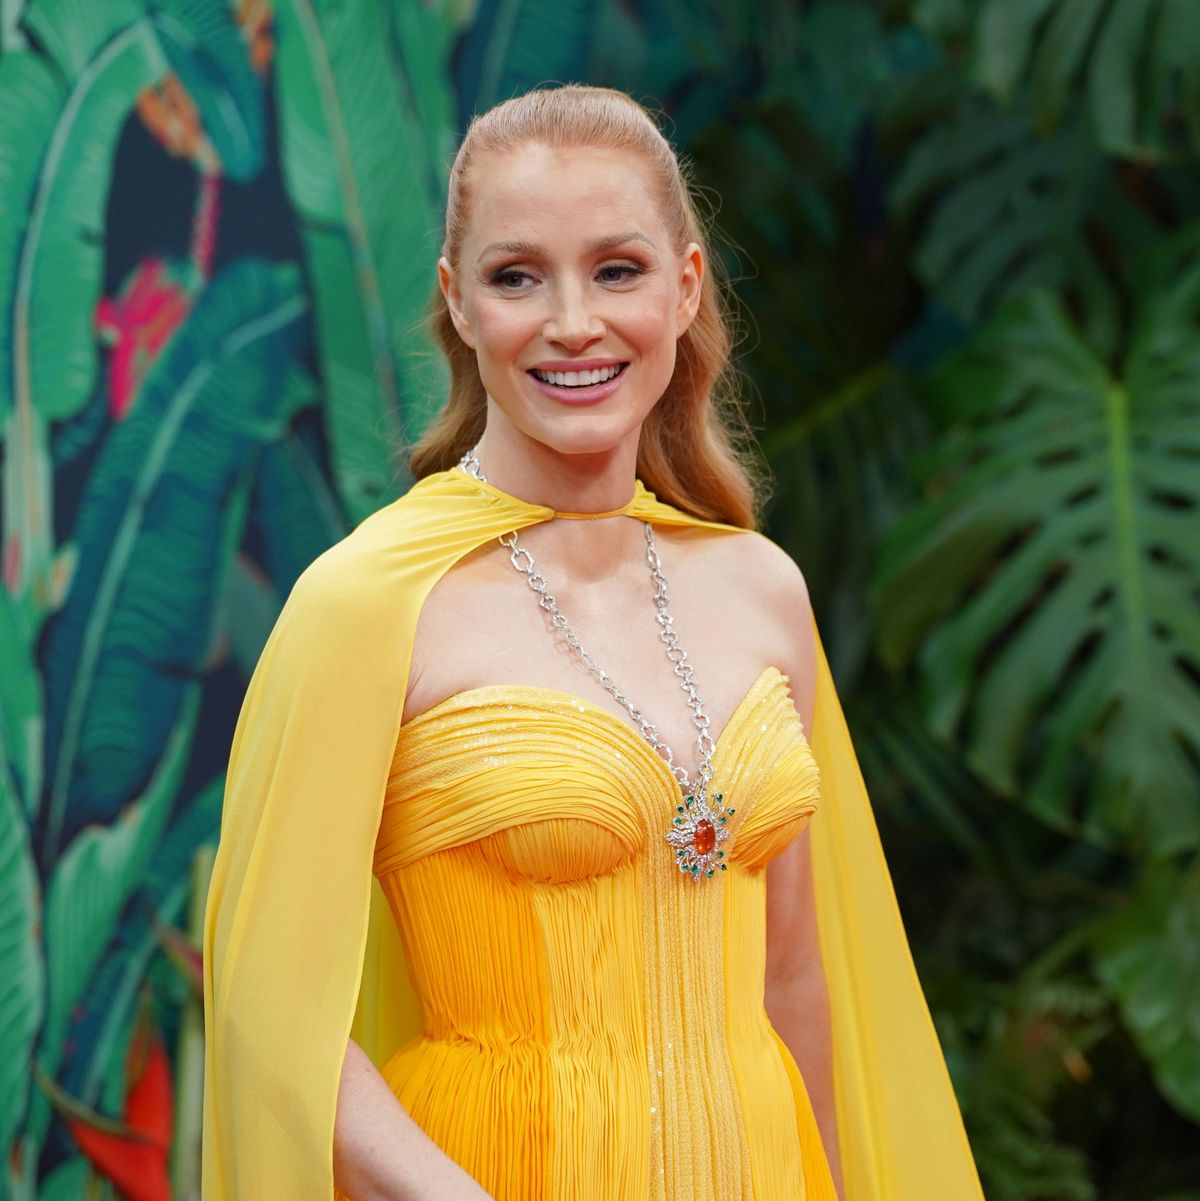 Jesika Gold Show Sex - Jessica Chastain stuns in yellow cape and gown at Tony Awards